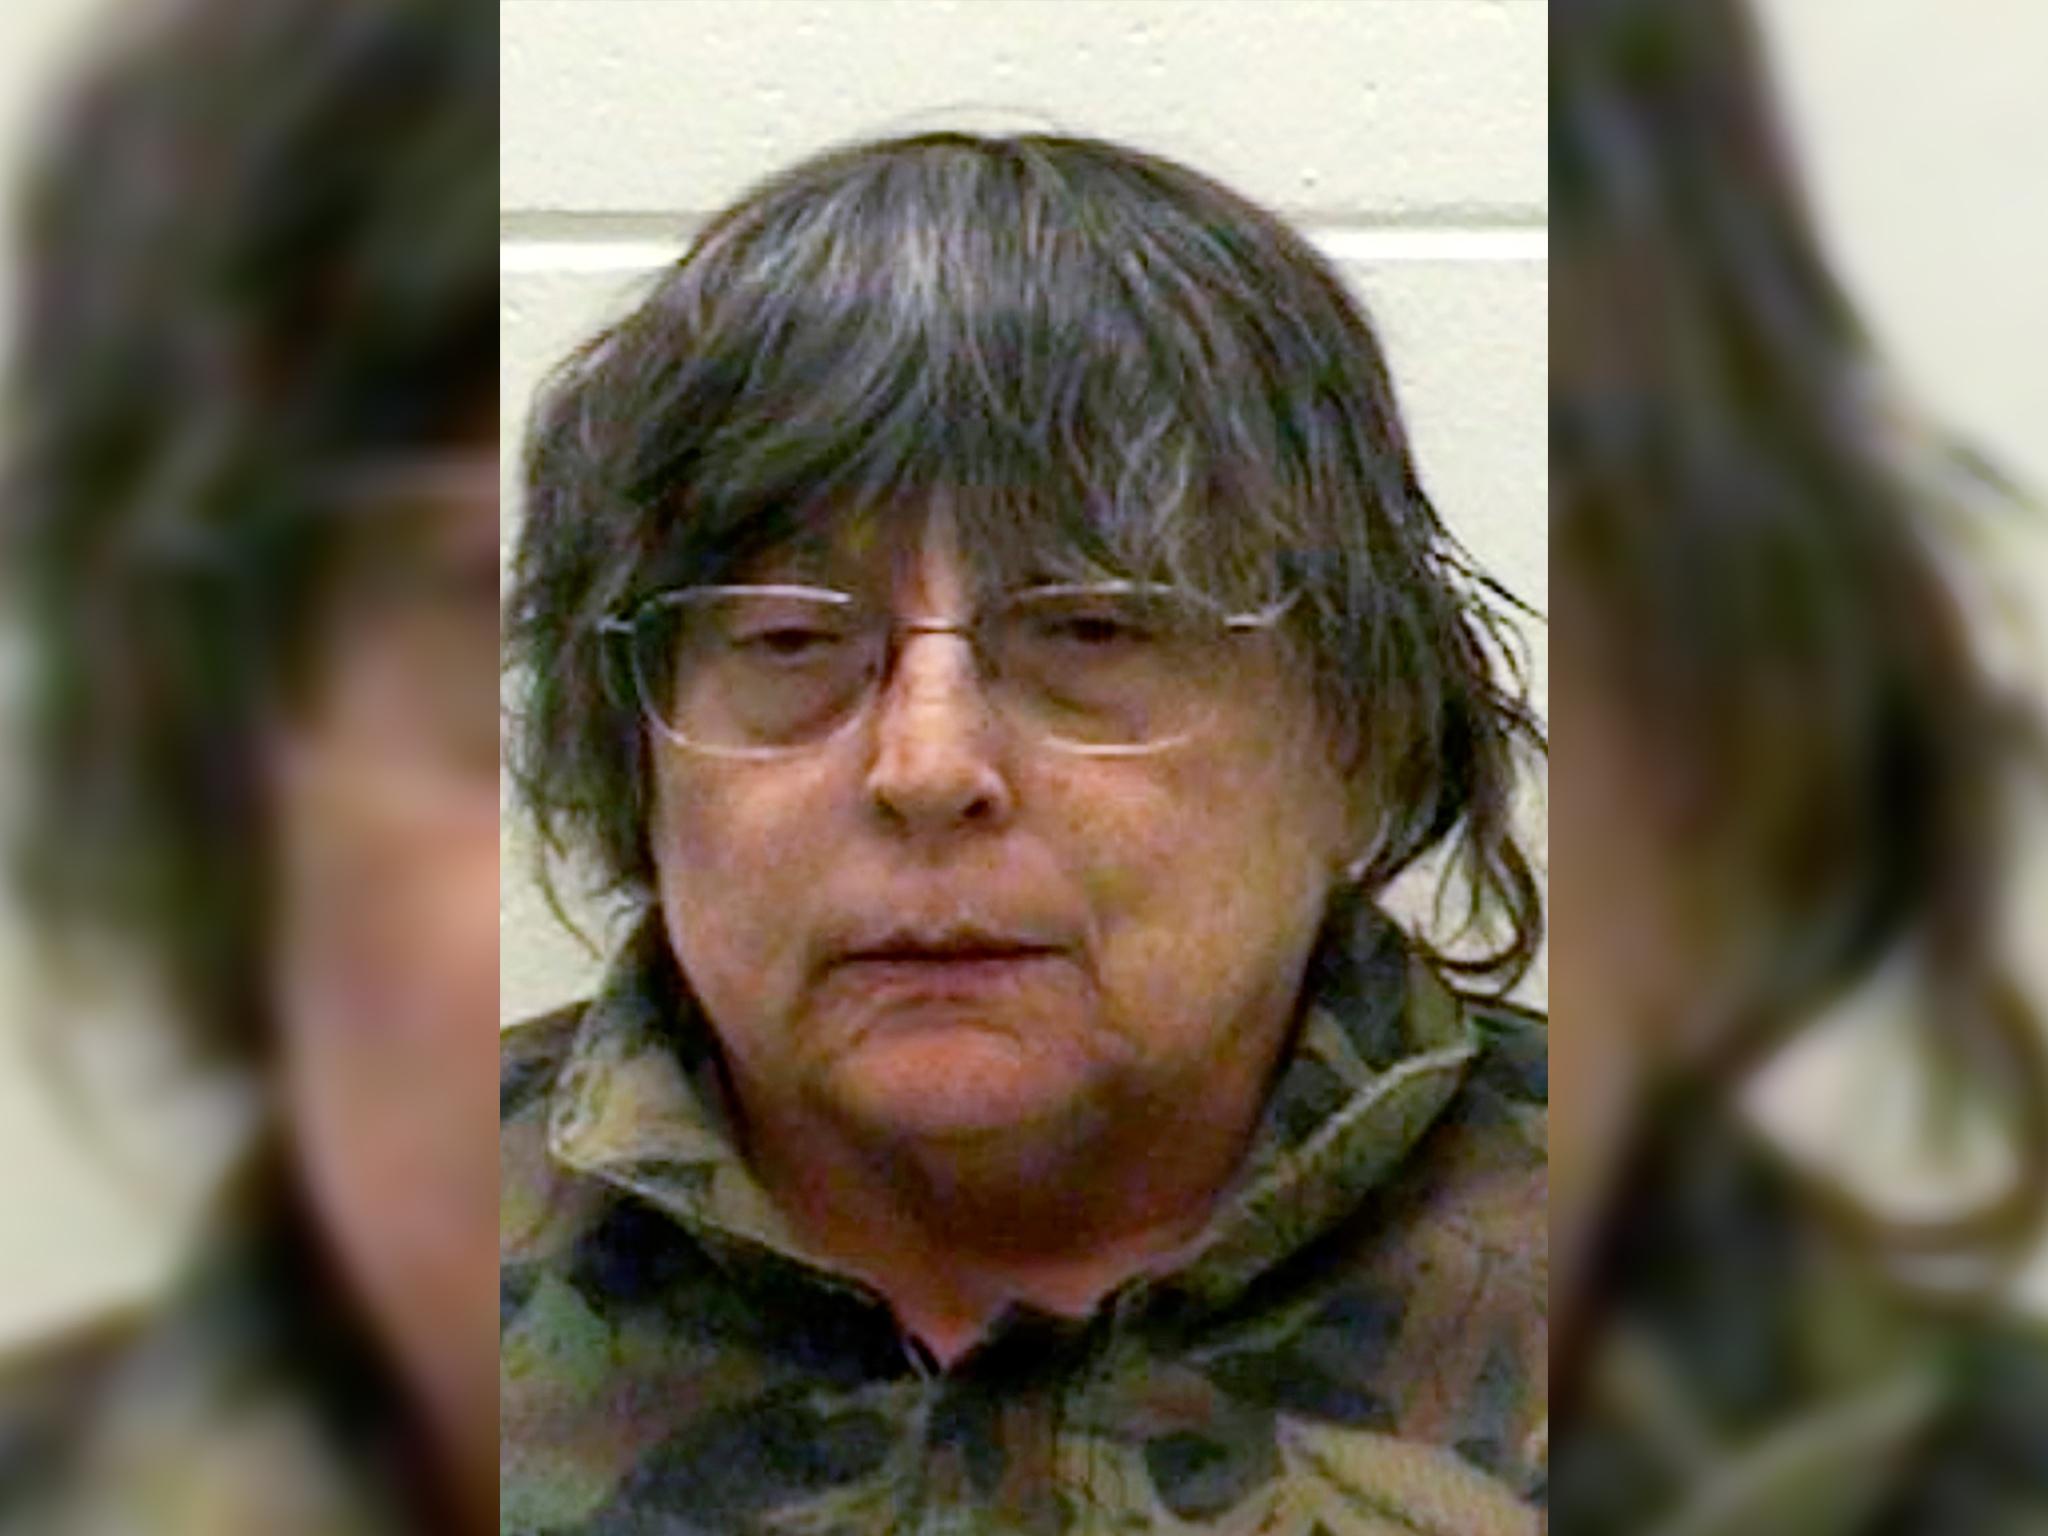 Bergold allegedly put the body of her 89-year-old mother, Ruby, in a small plastic tub and moved it to the basement of her Peshtigo home